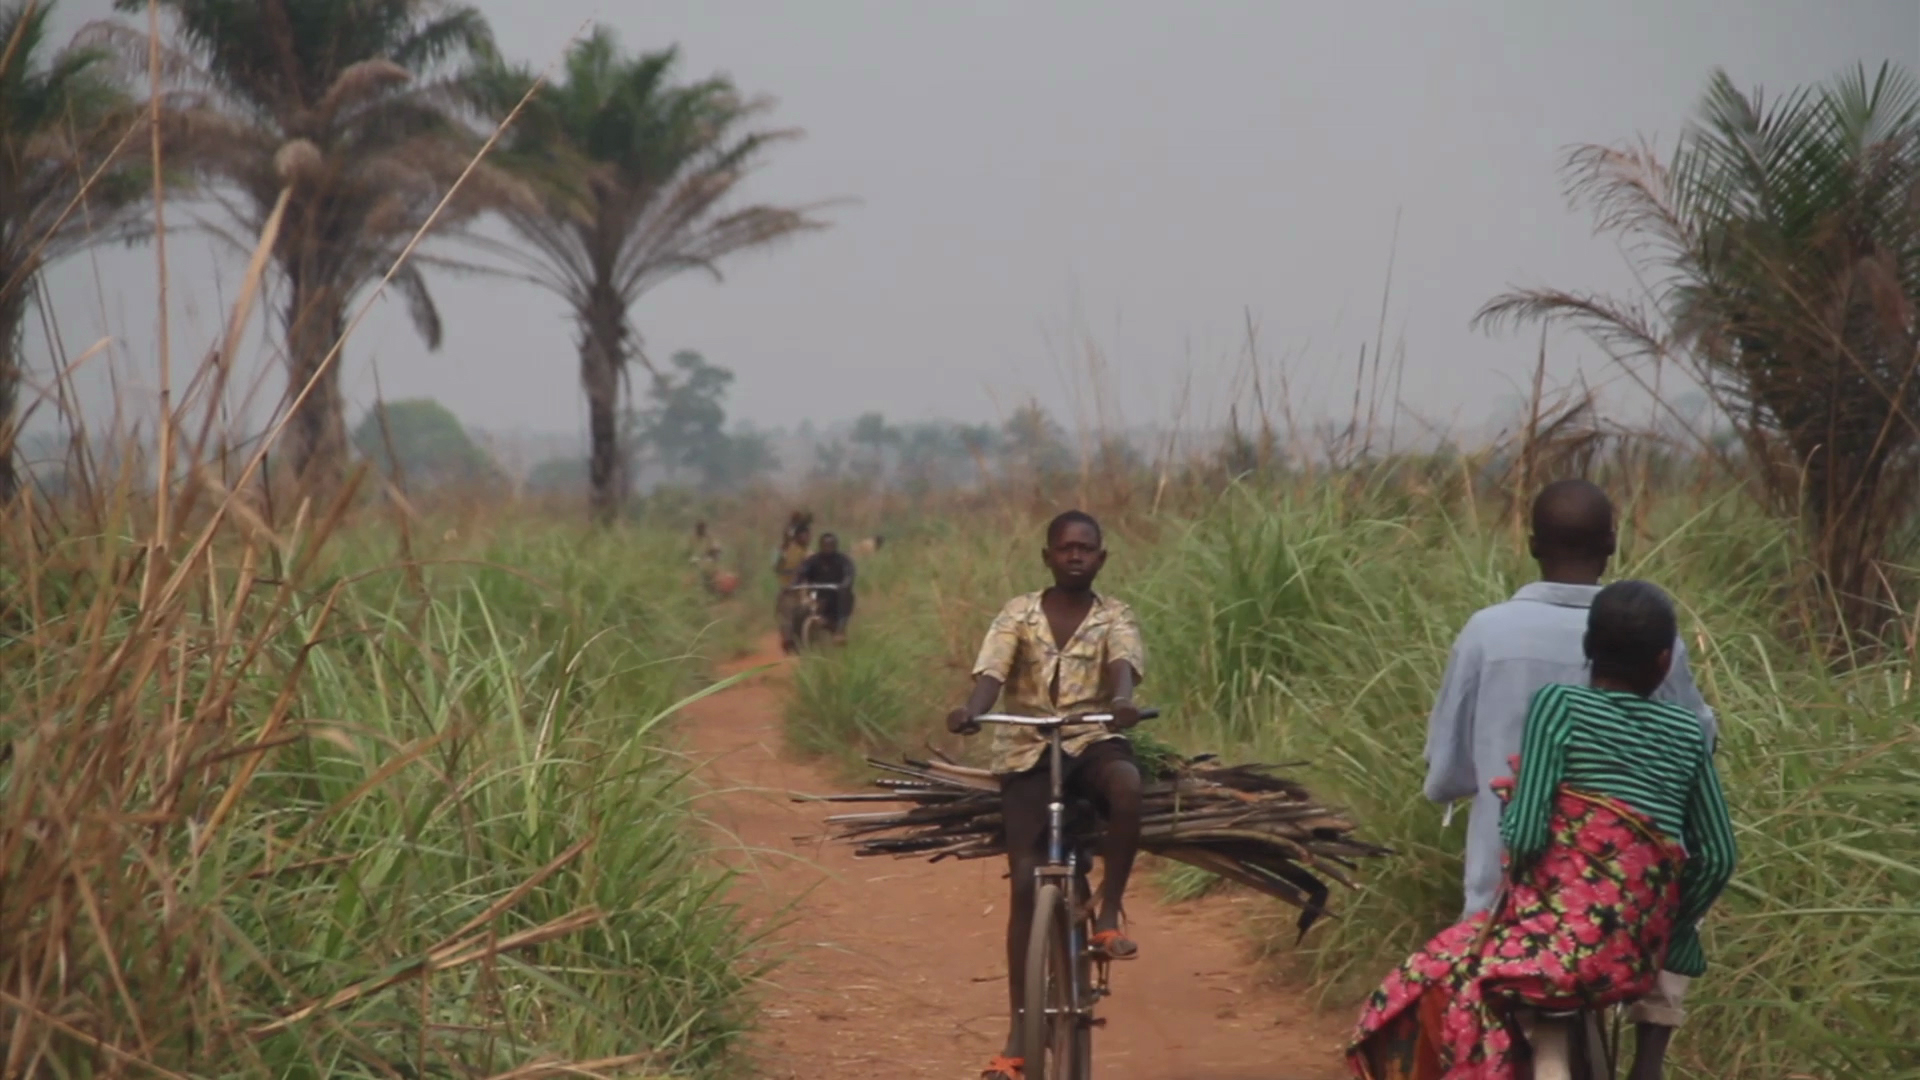 A young man riding a bike on a dirt path carrying bananas while others walk by.